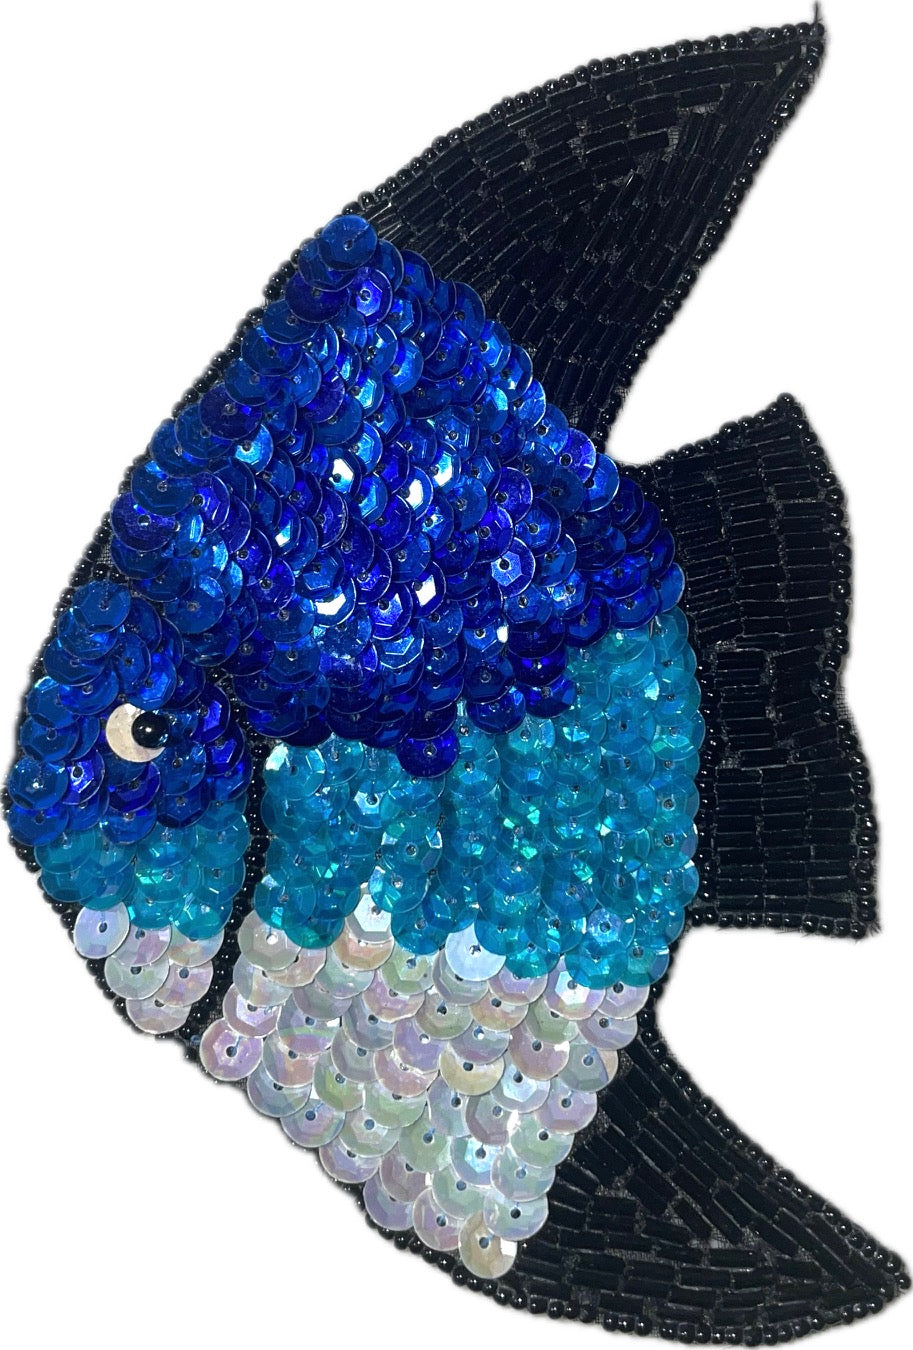 Fish with Blue, Turquoise, White Sequins and Black Beads, 6